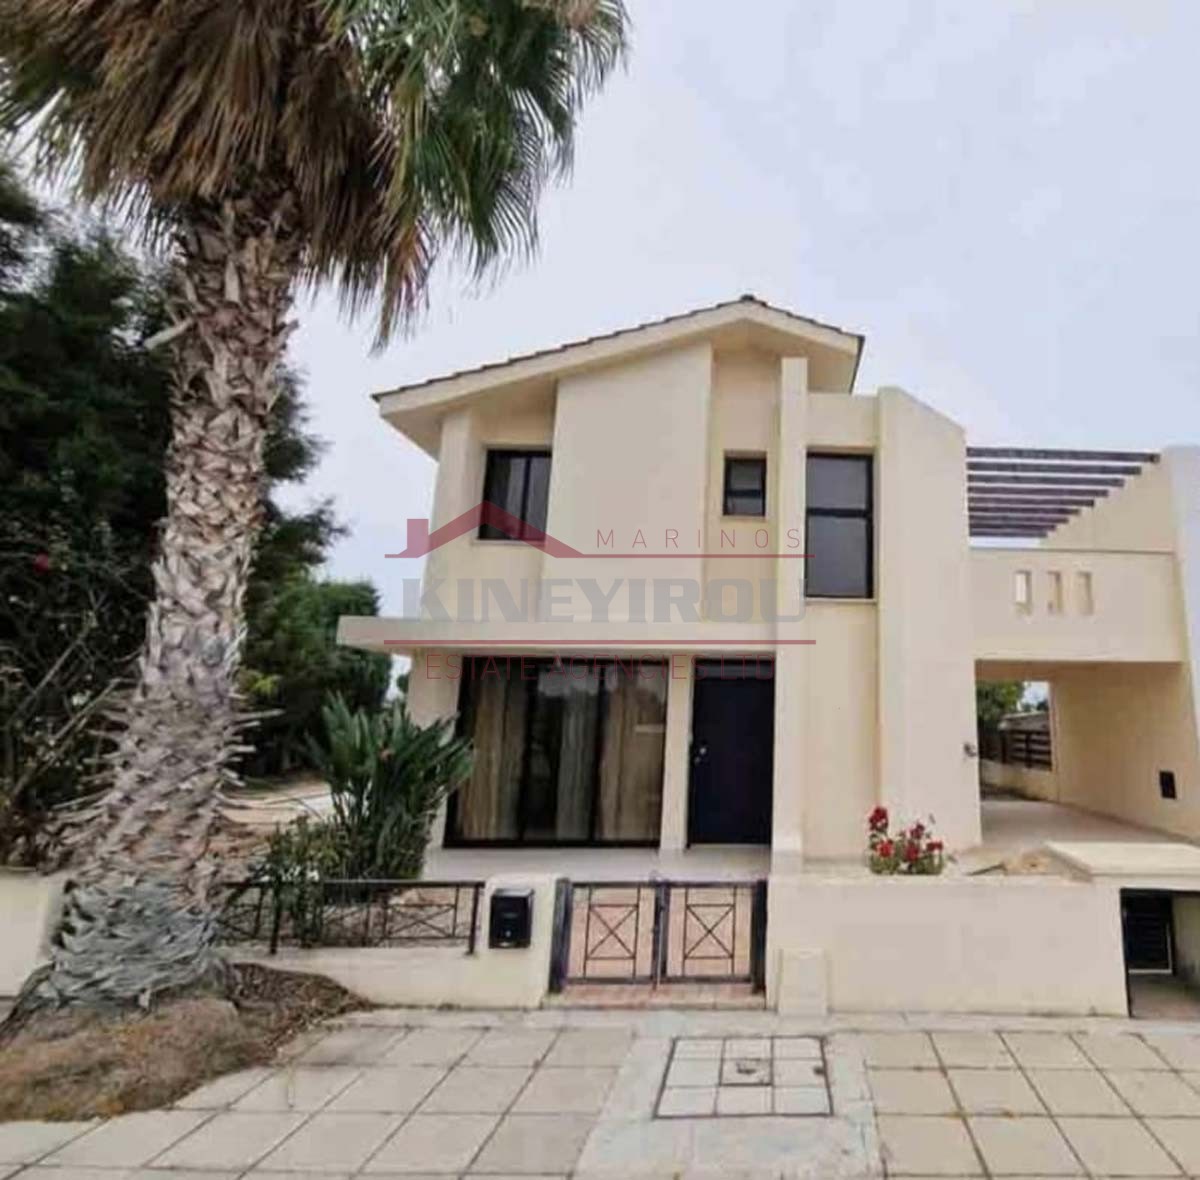 Two-storey house with a swimming pool located within walking distance to the beach in Pyla, Larnaca.